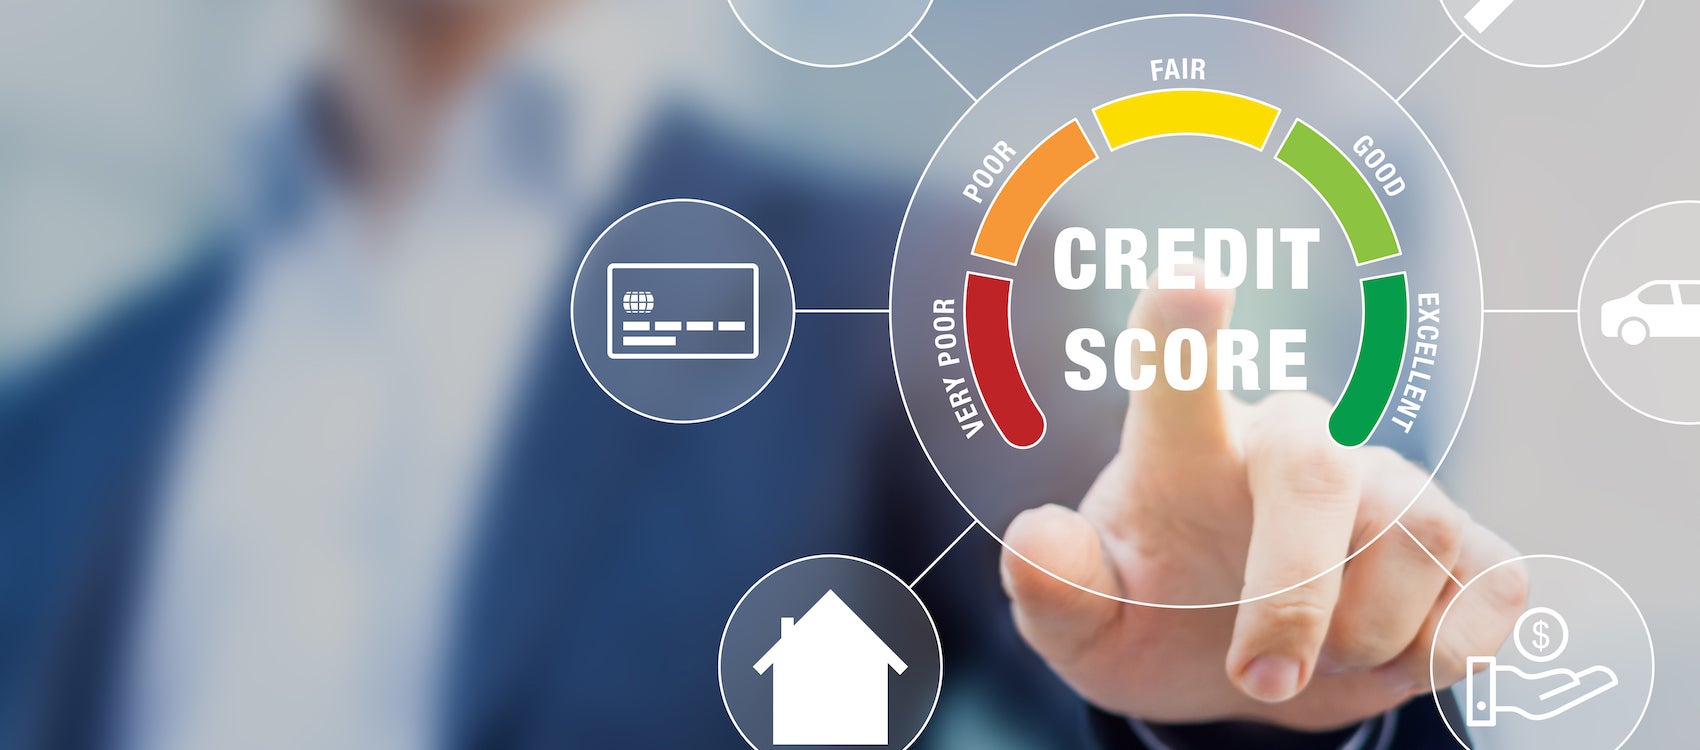 How Does My Credit Score Affect My Loan?